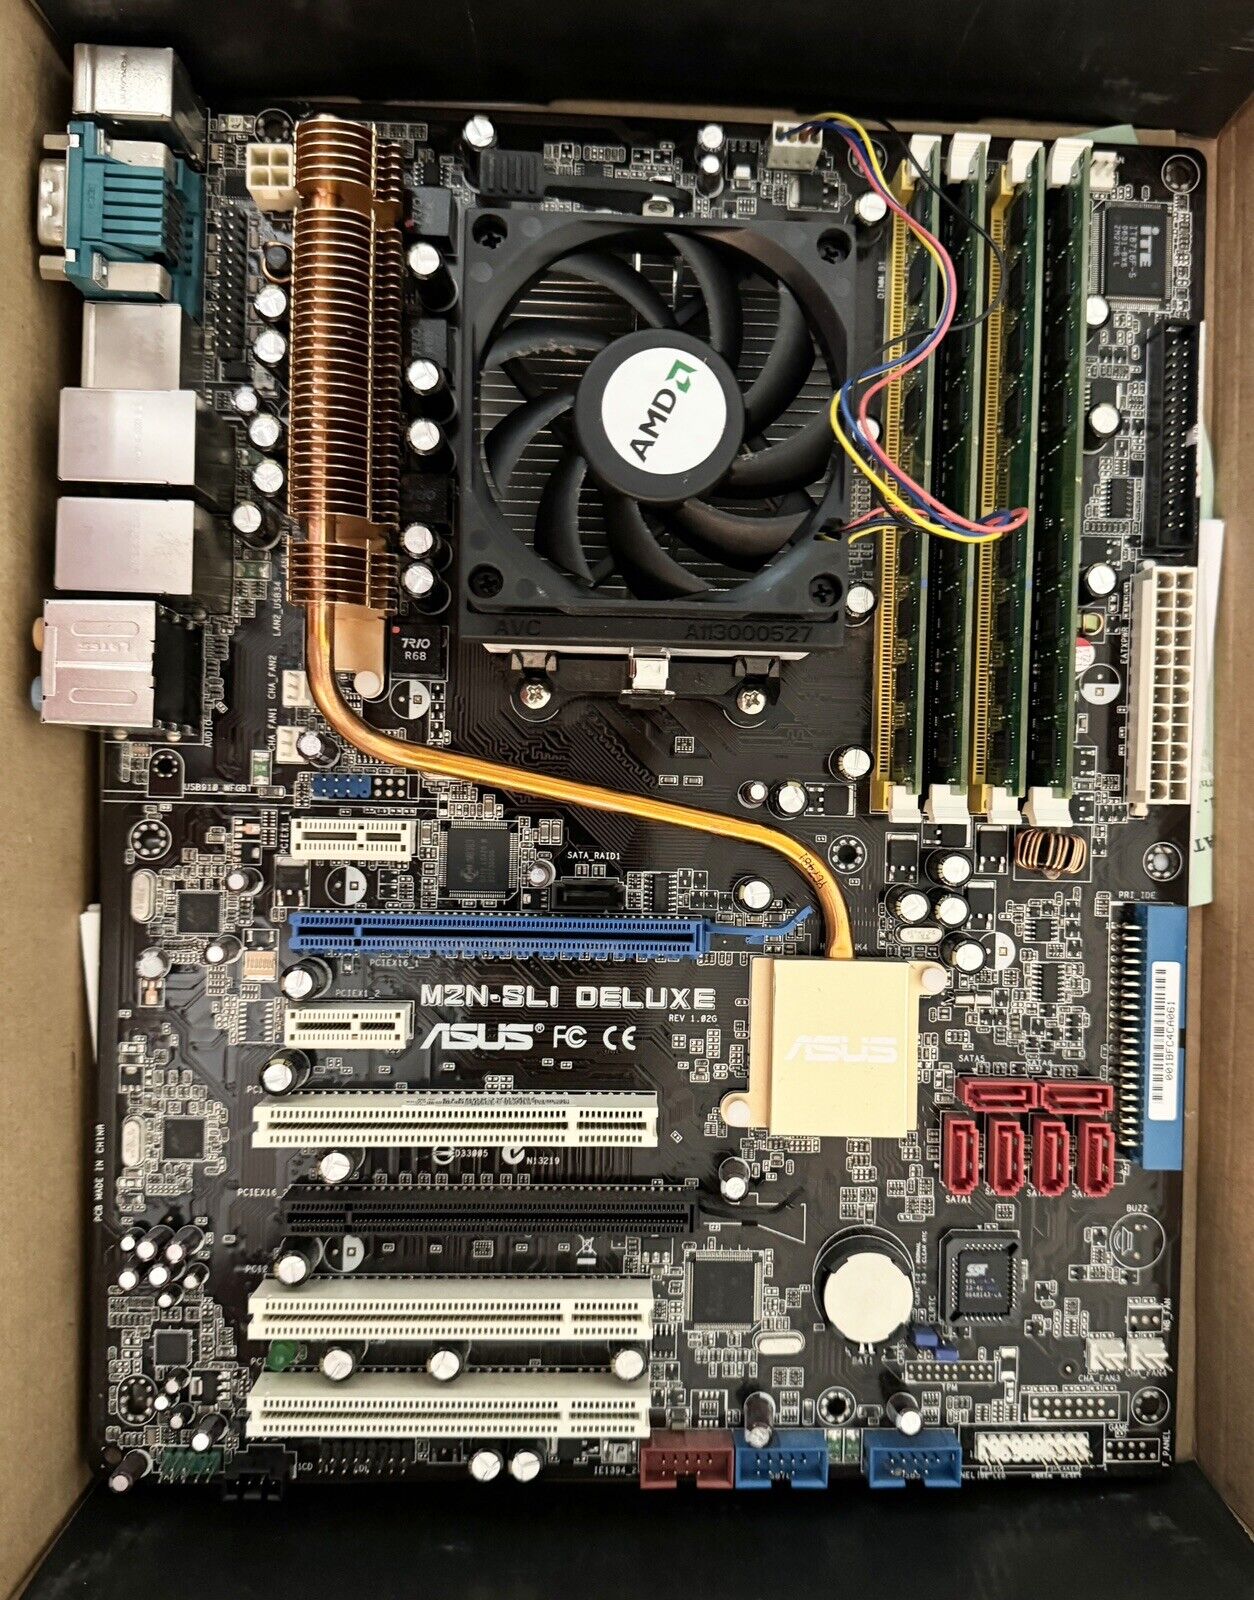 ASUS M2N-SLI Deluxe With AMD 5600+ And 8gig RAM